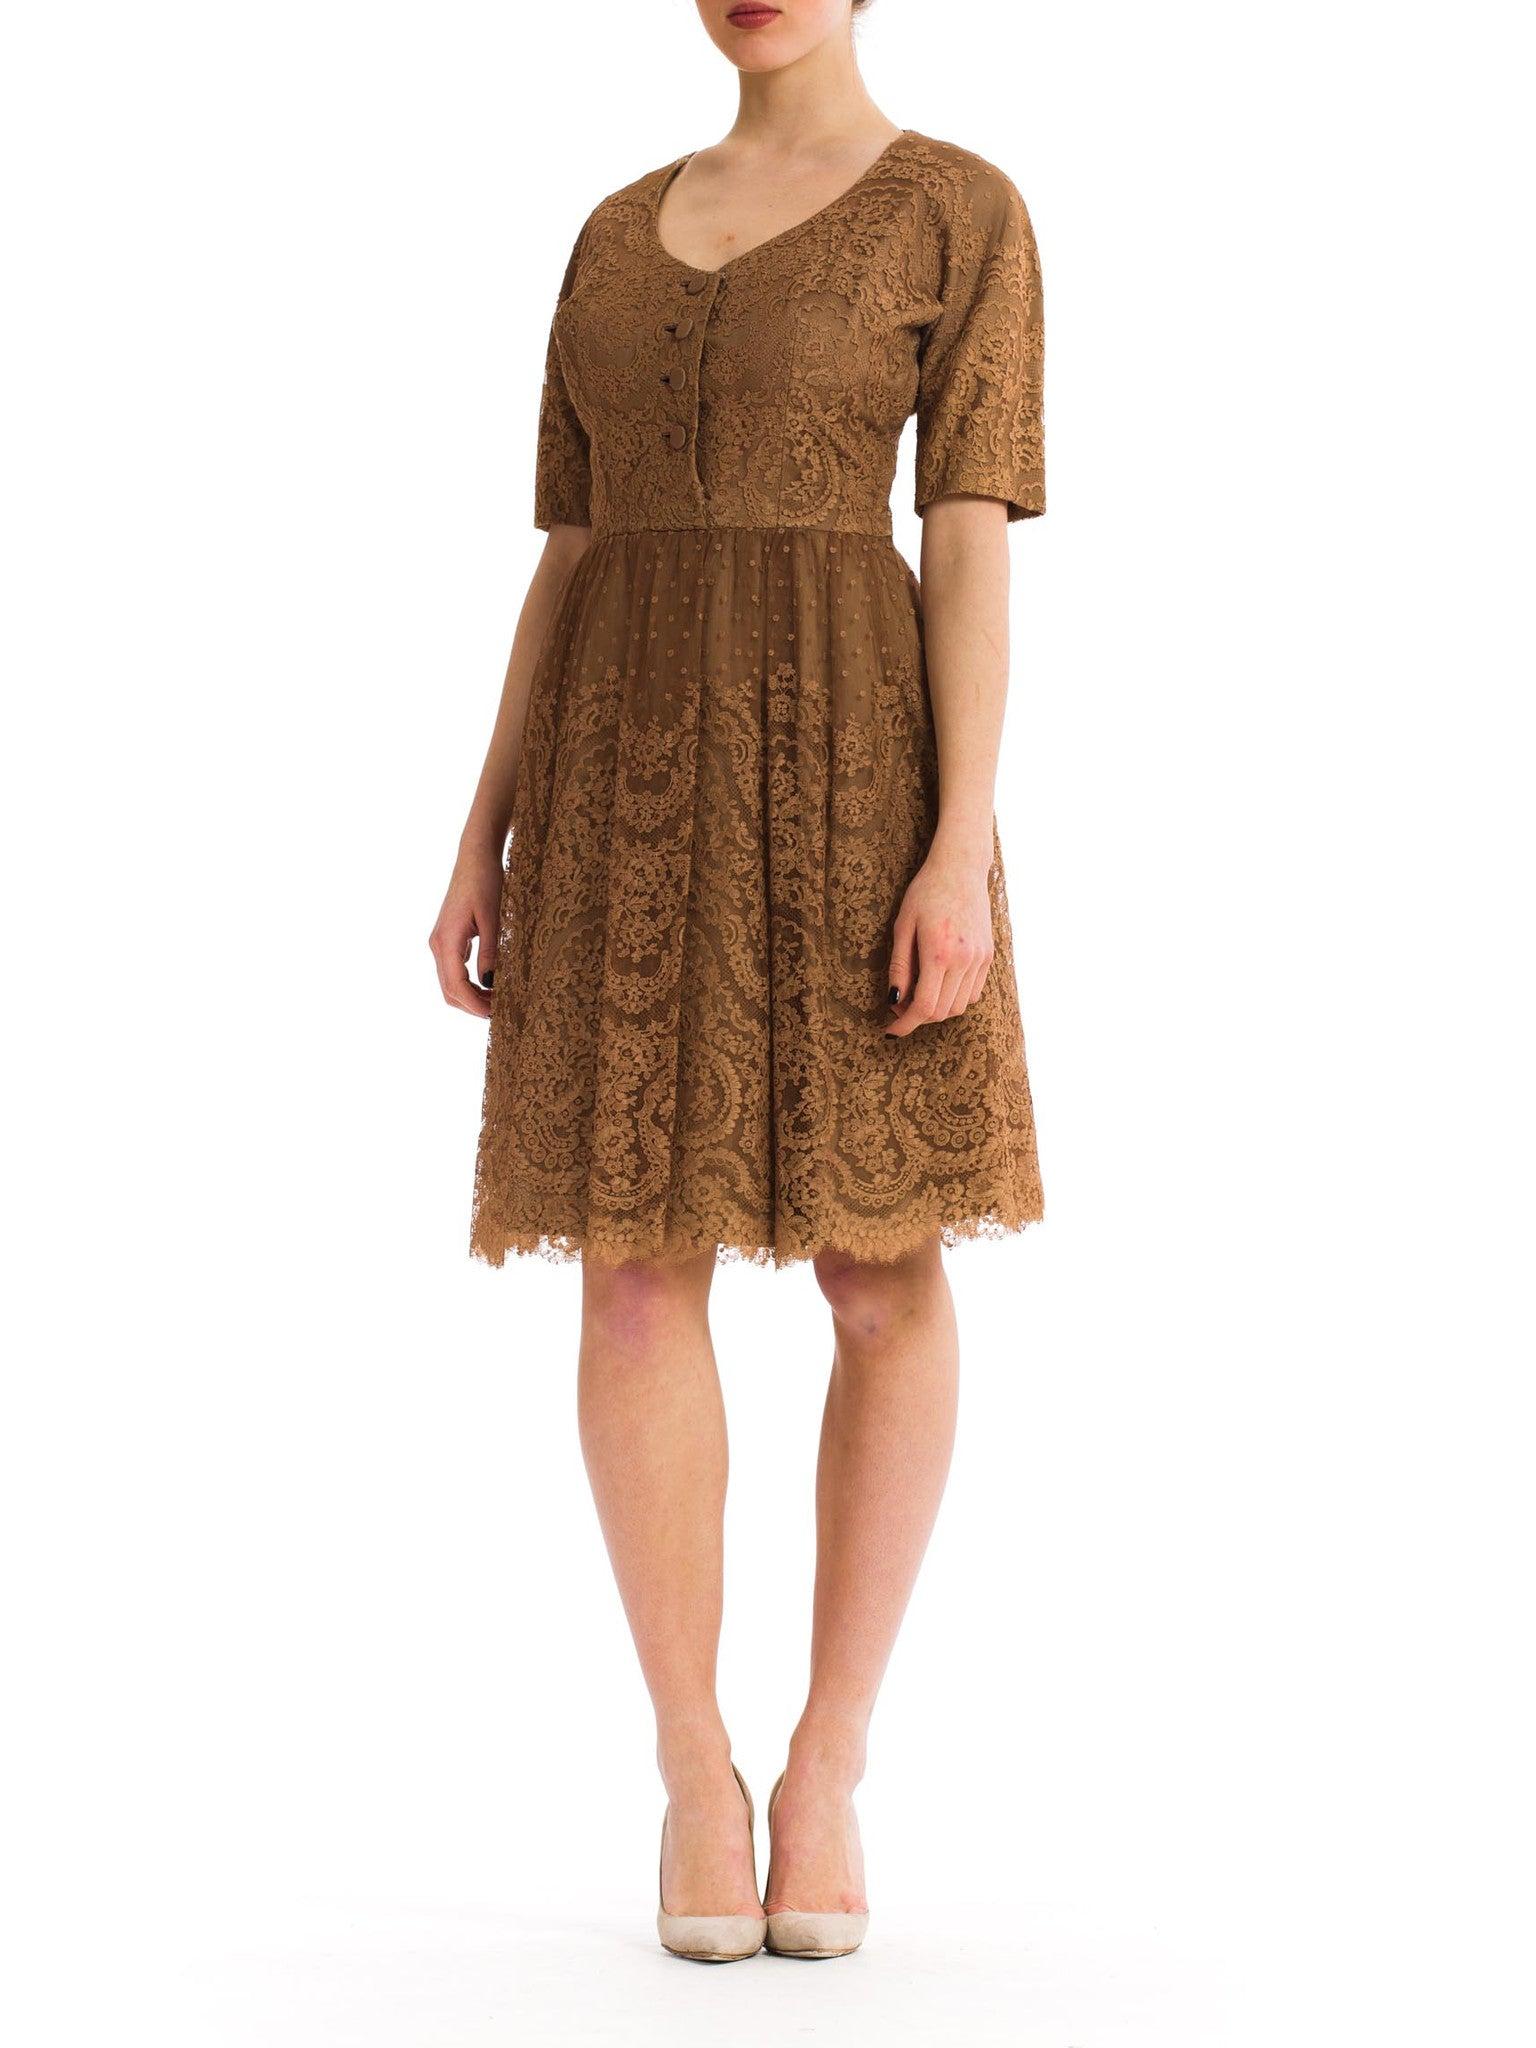 1950S NAT KAPLAN Brown Rayon & Silk Chantilly Lace Short Sleeve Cocktail Dress For Sale 6